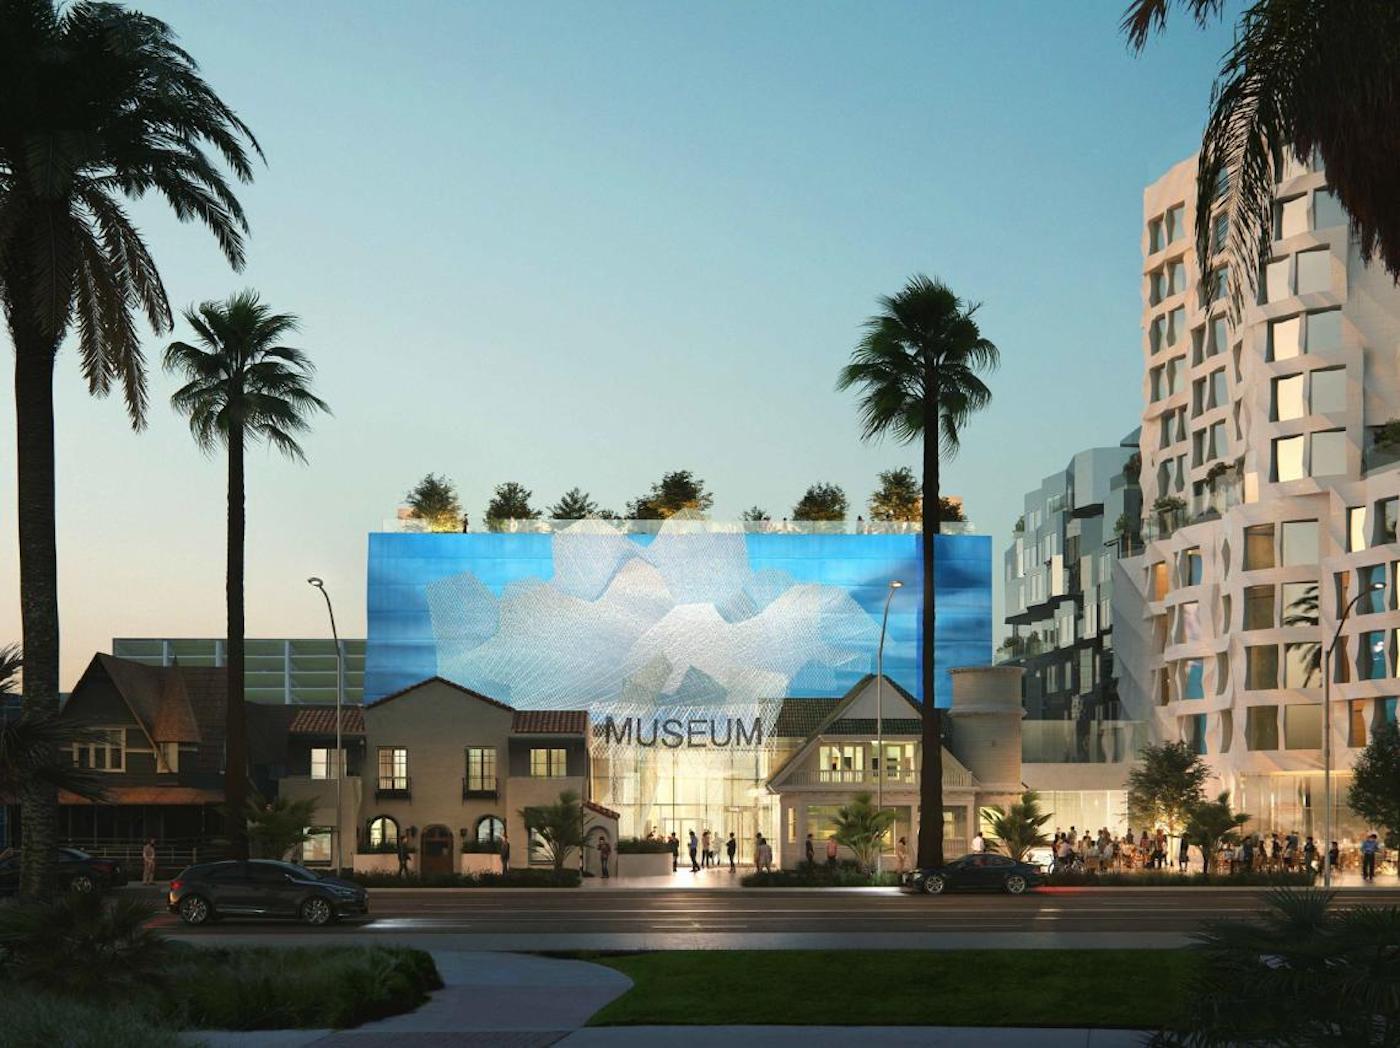 rendering of a museum complex flanked by palm trees